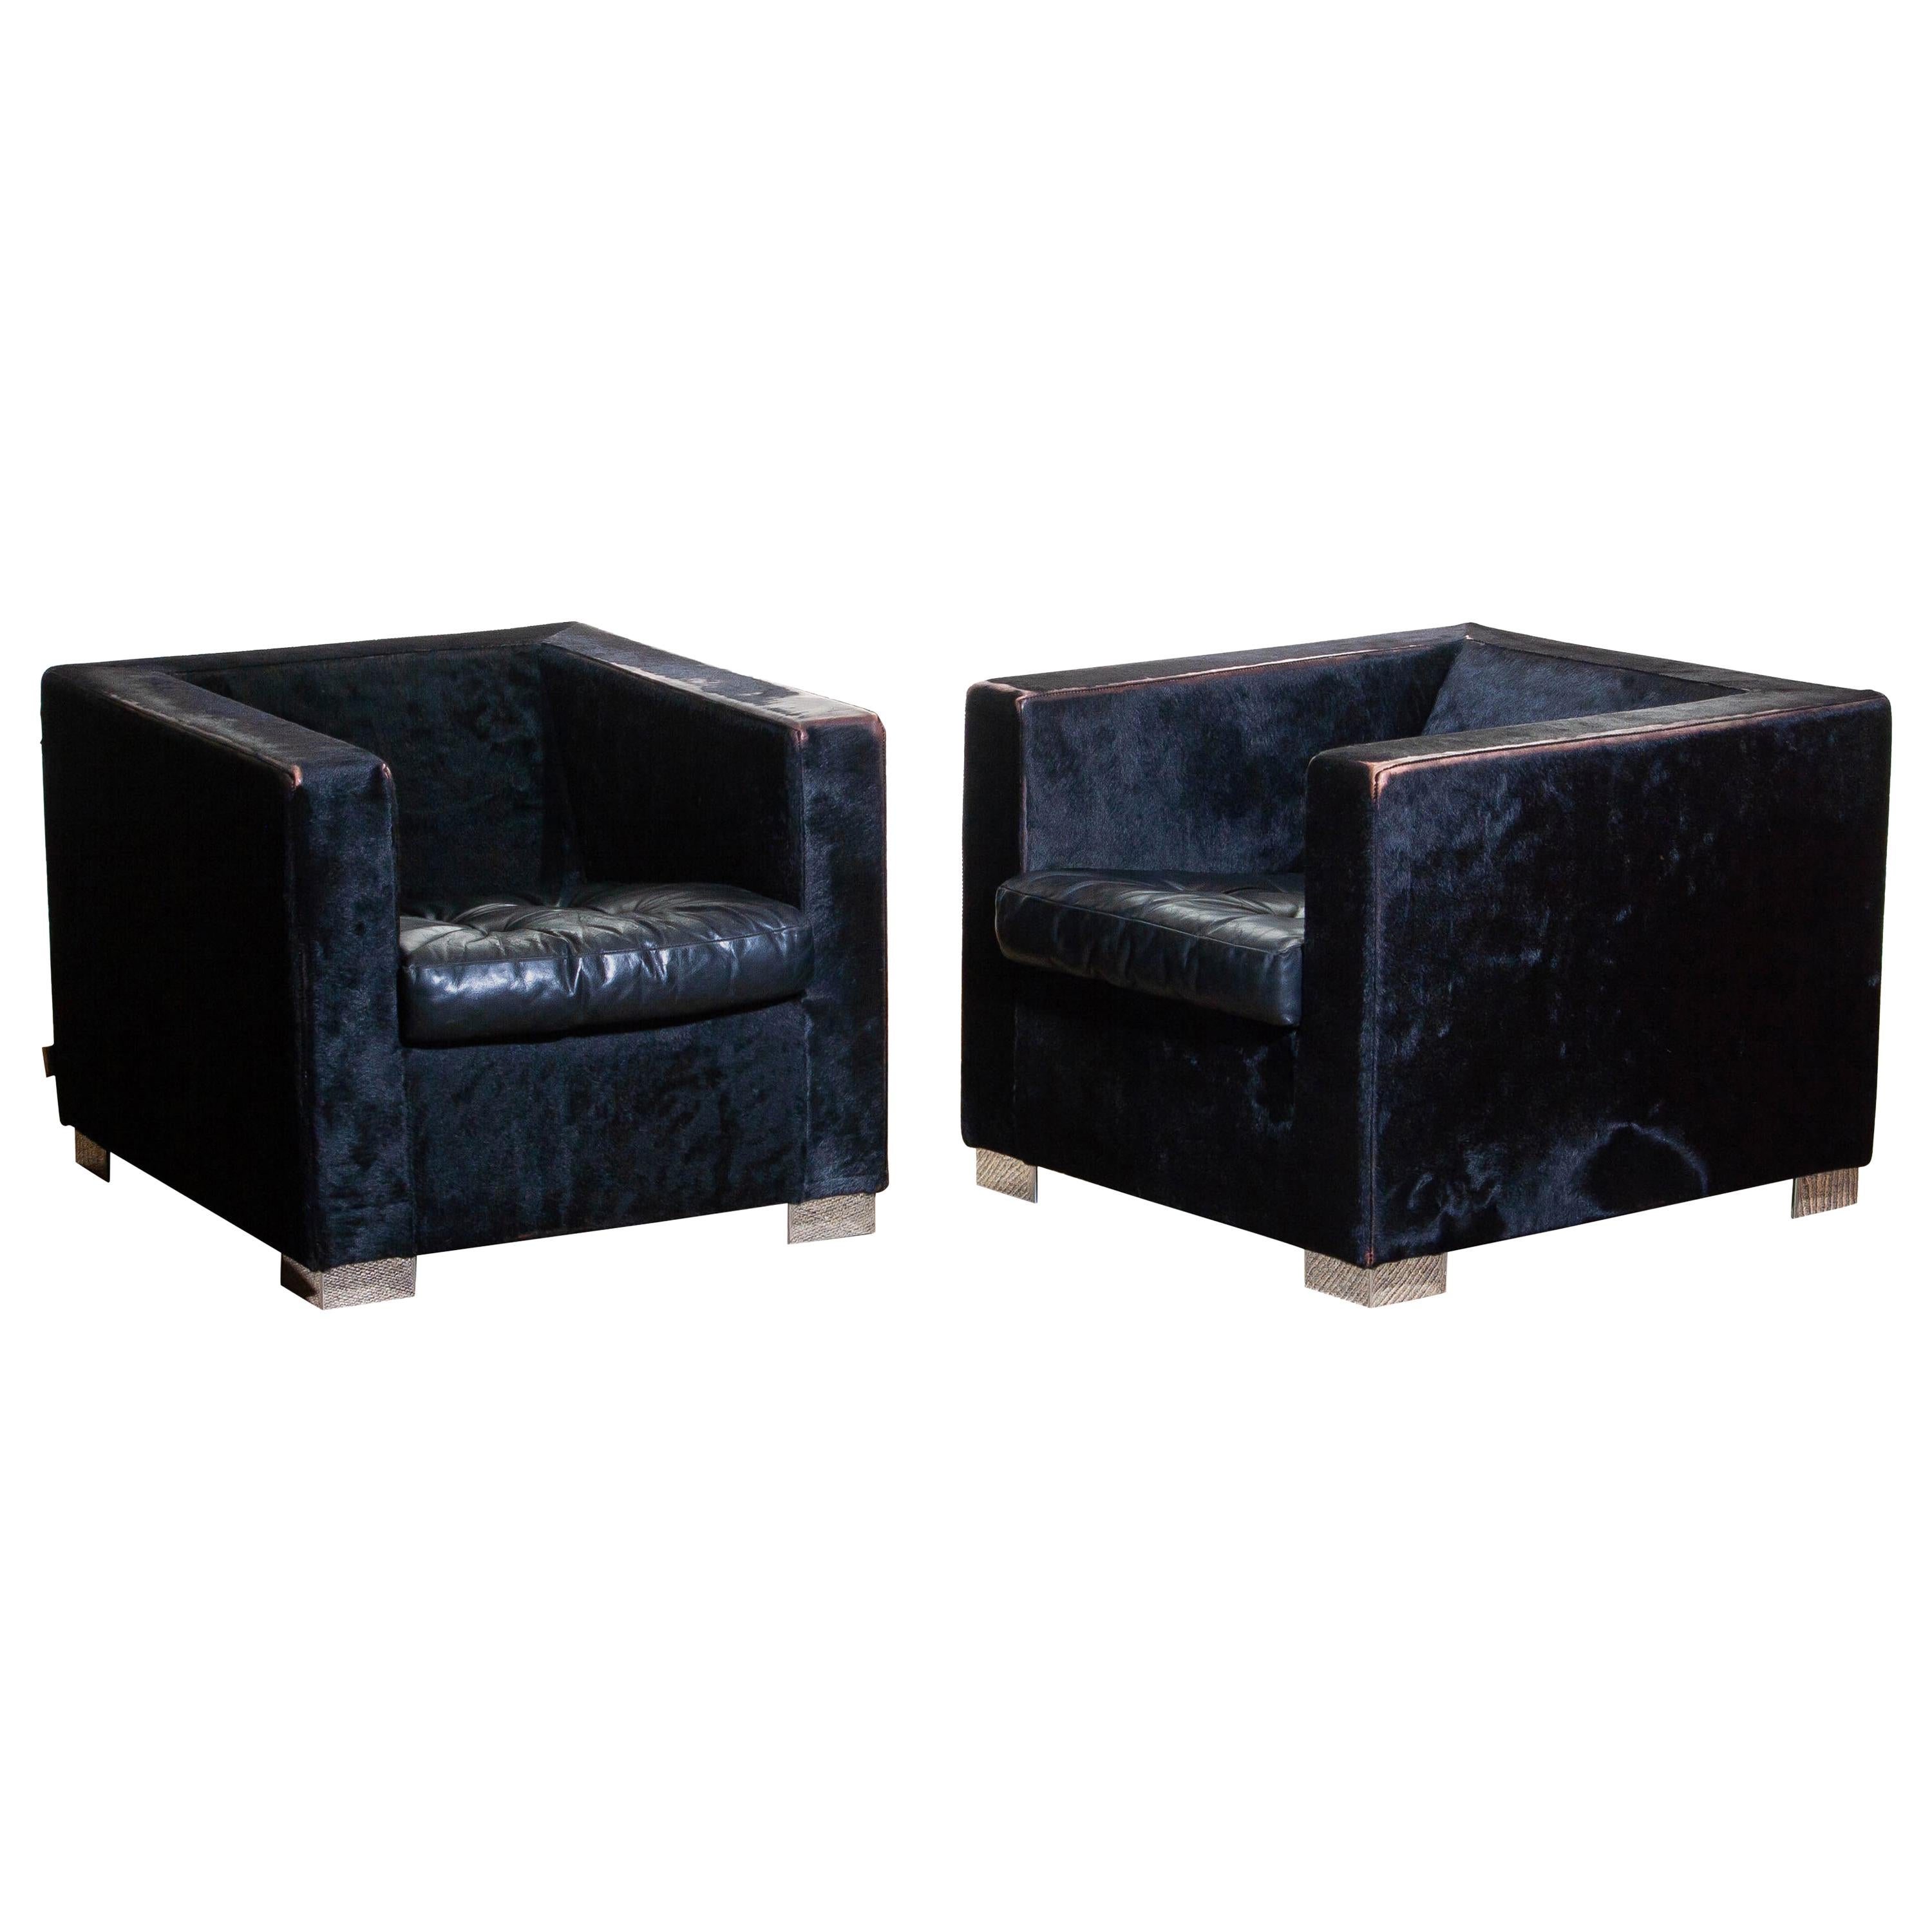 Contemporary set of two “Suitcase” armchairs designed by Rodolfo Dordoni for Minotti, 1990.
Upholstered with pony (black) and the padded seat cushion with (also black) leather.
All standing on squared chromed metal legs.

Note: One chair shows